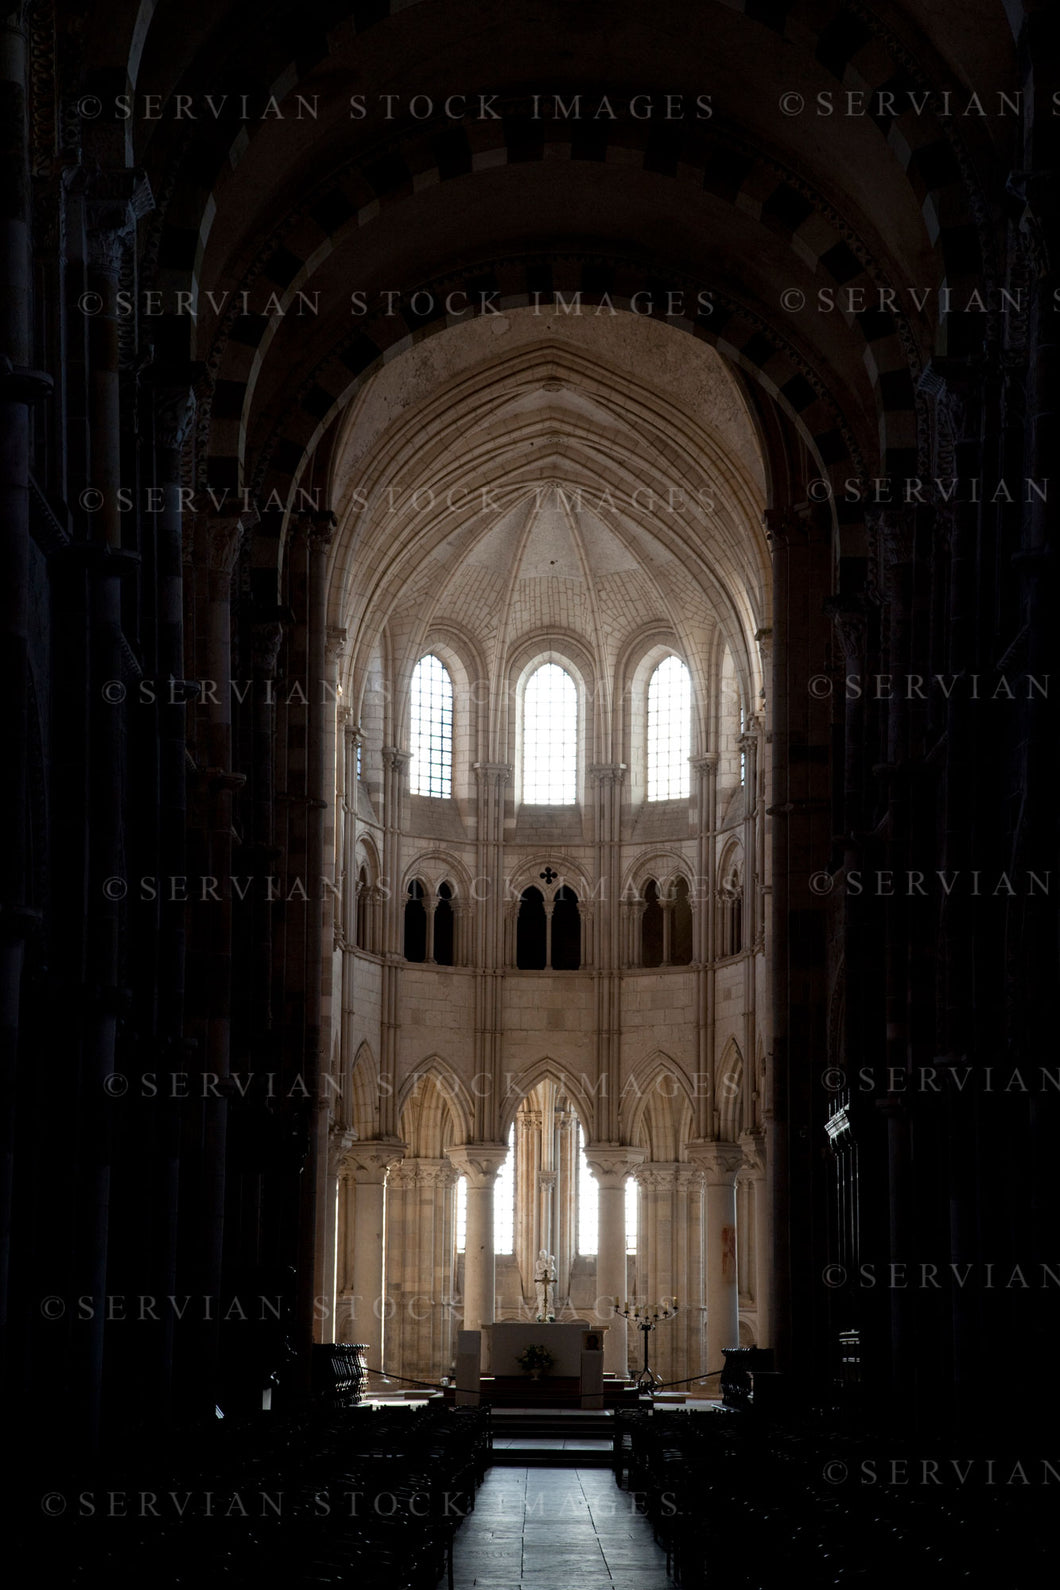 Historical building - Abbey interior, France (Nick 5935)